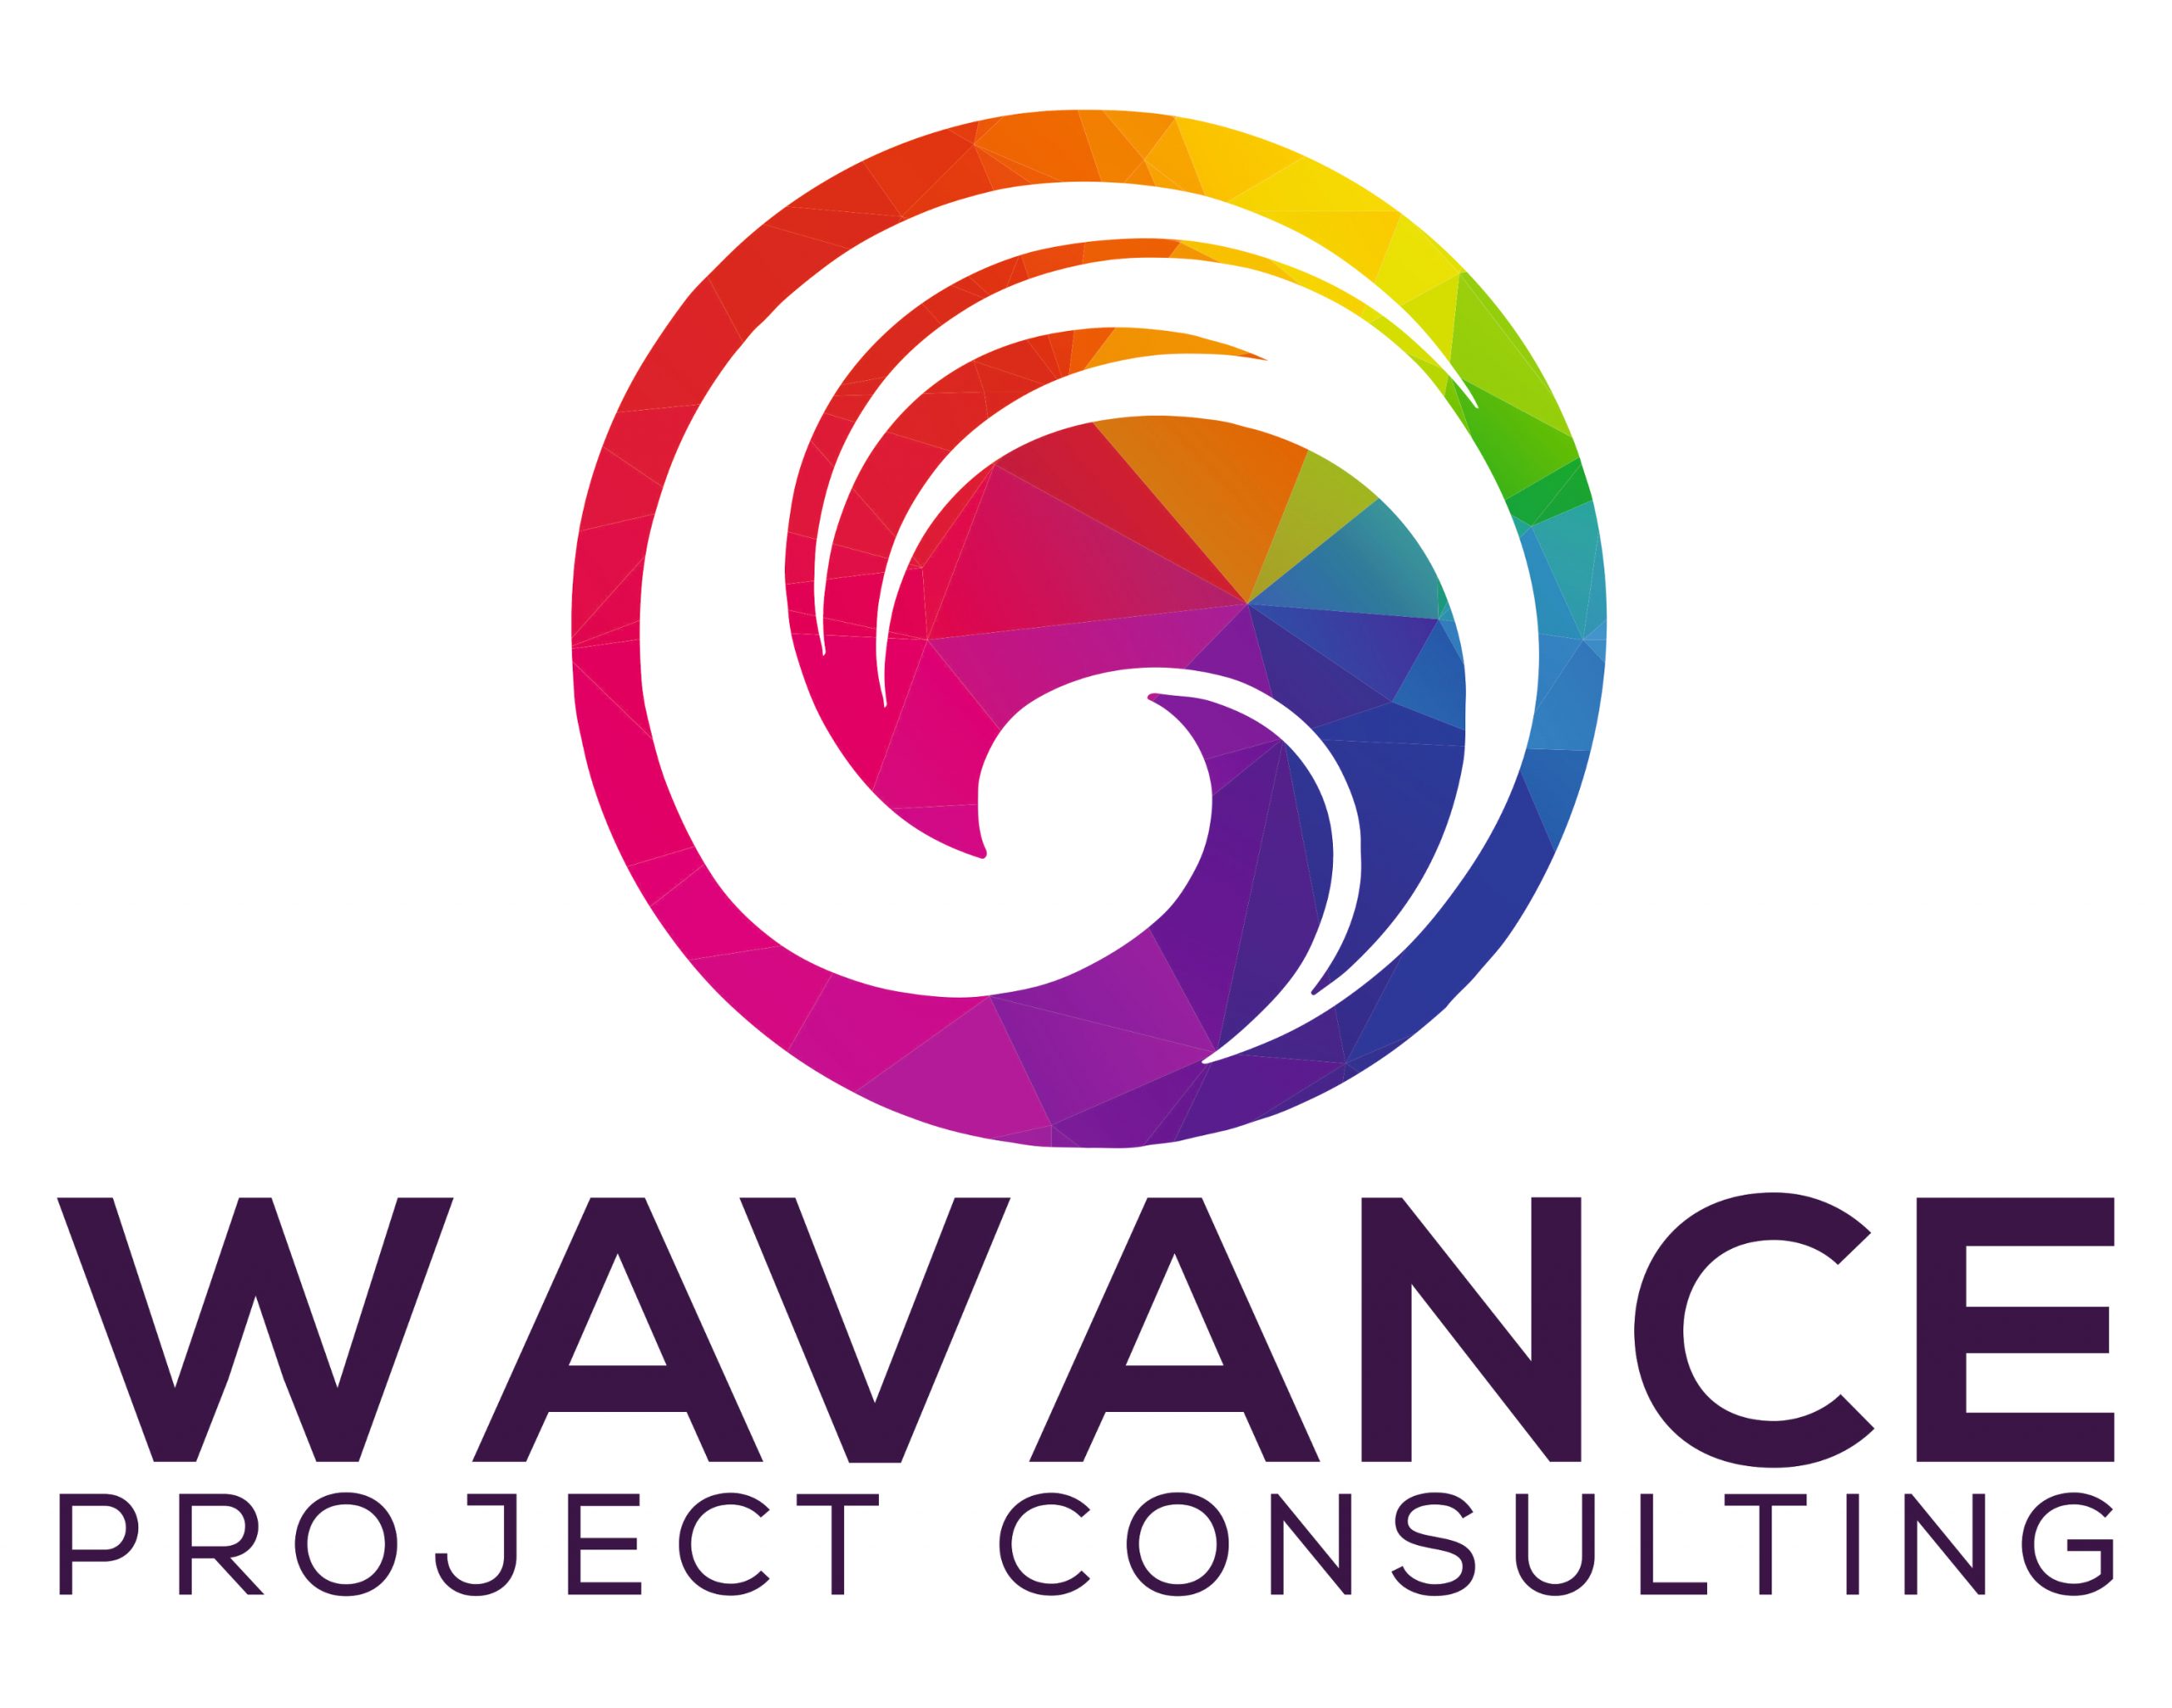 WAVANCE Project Consulting Logo